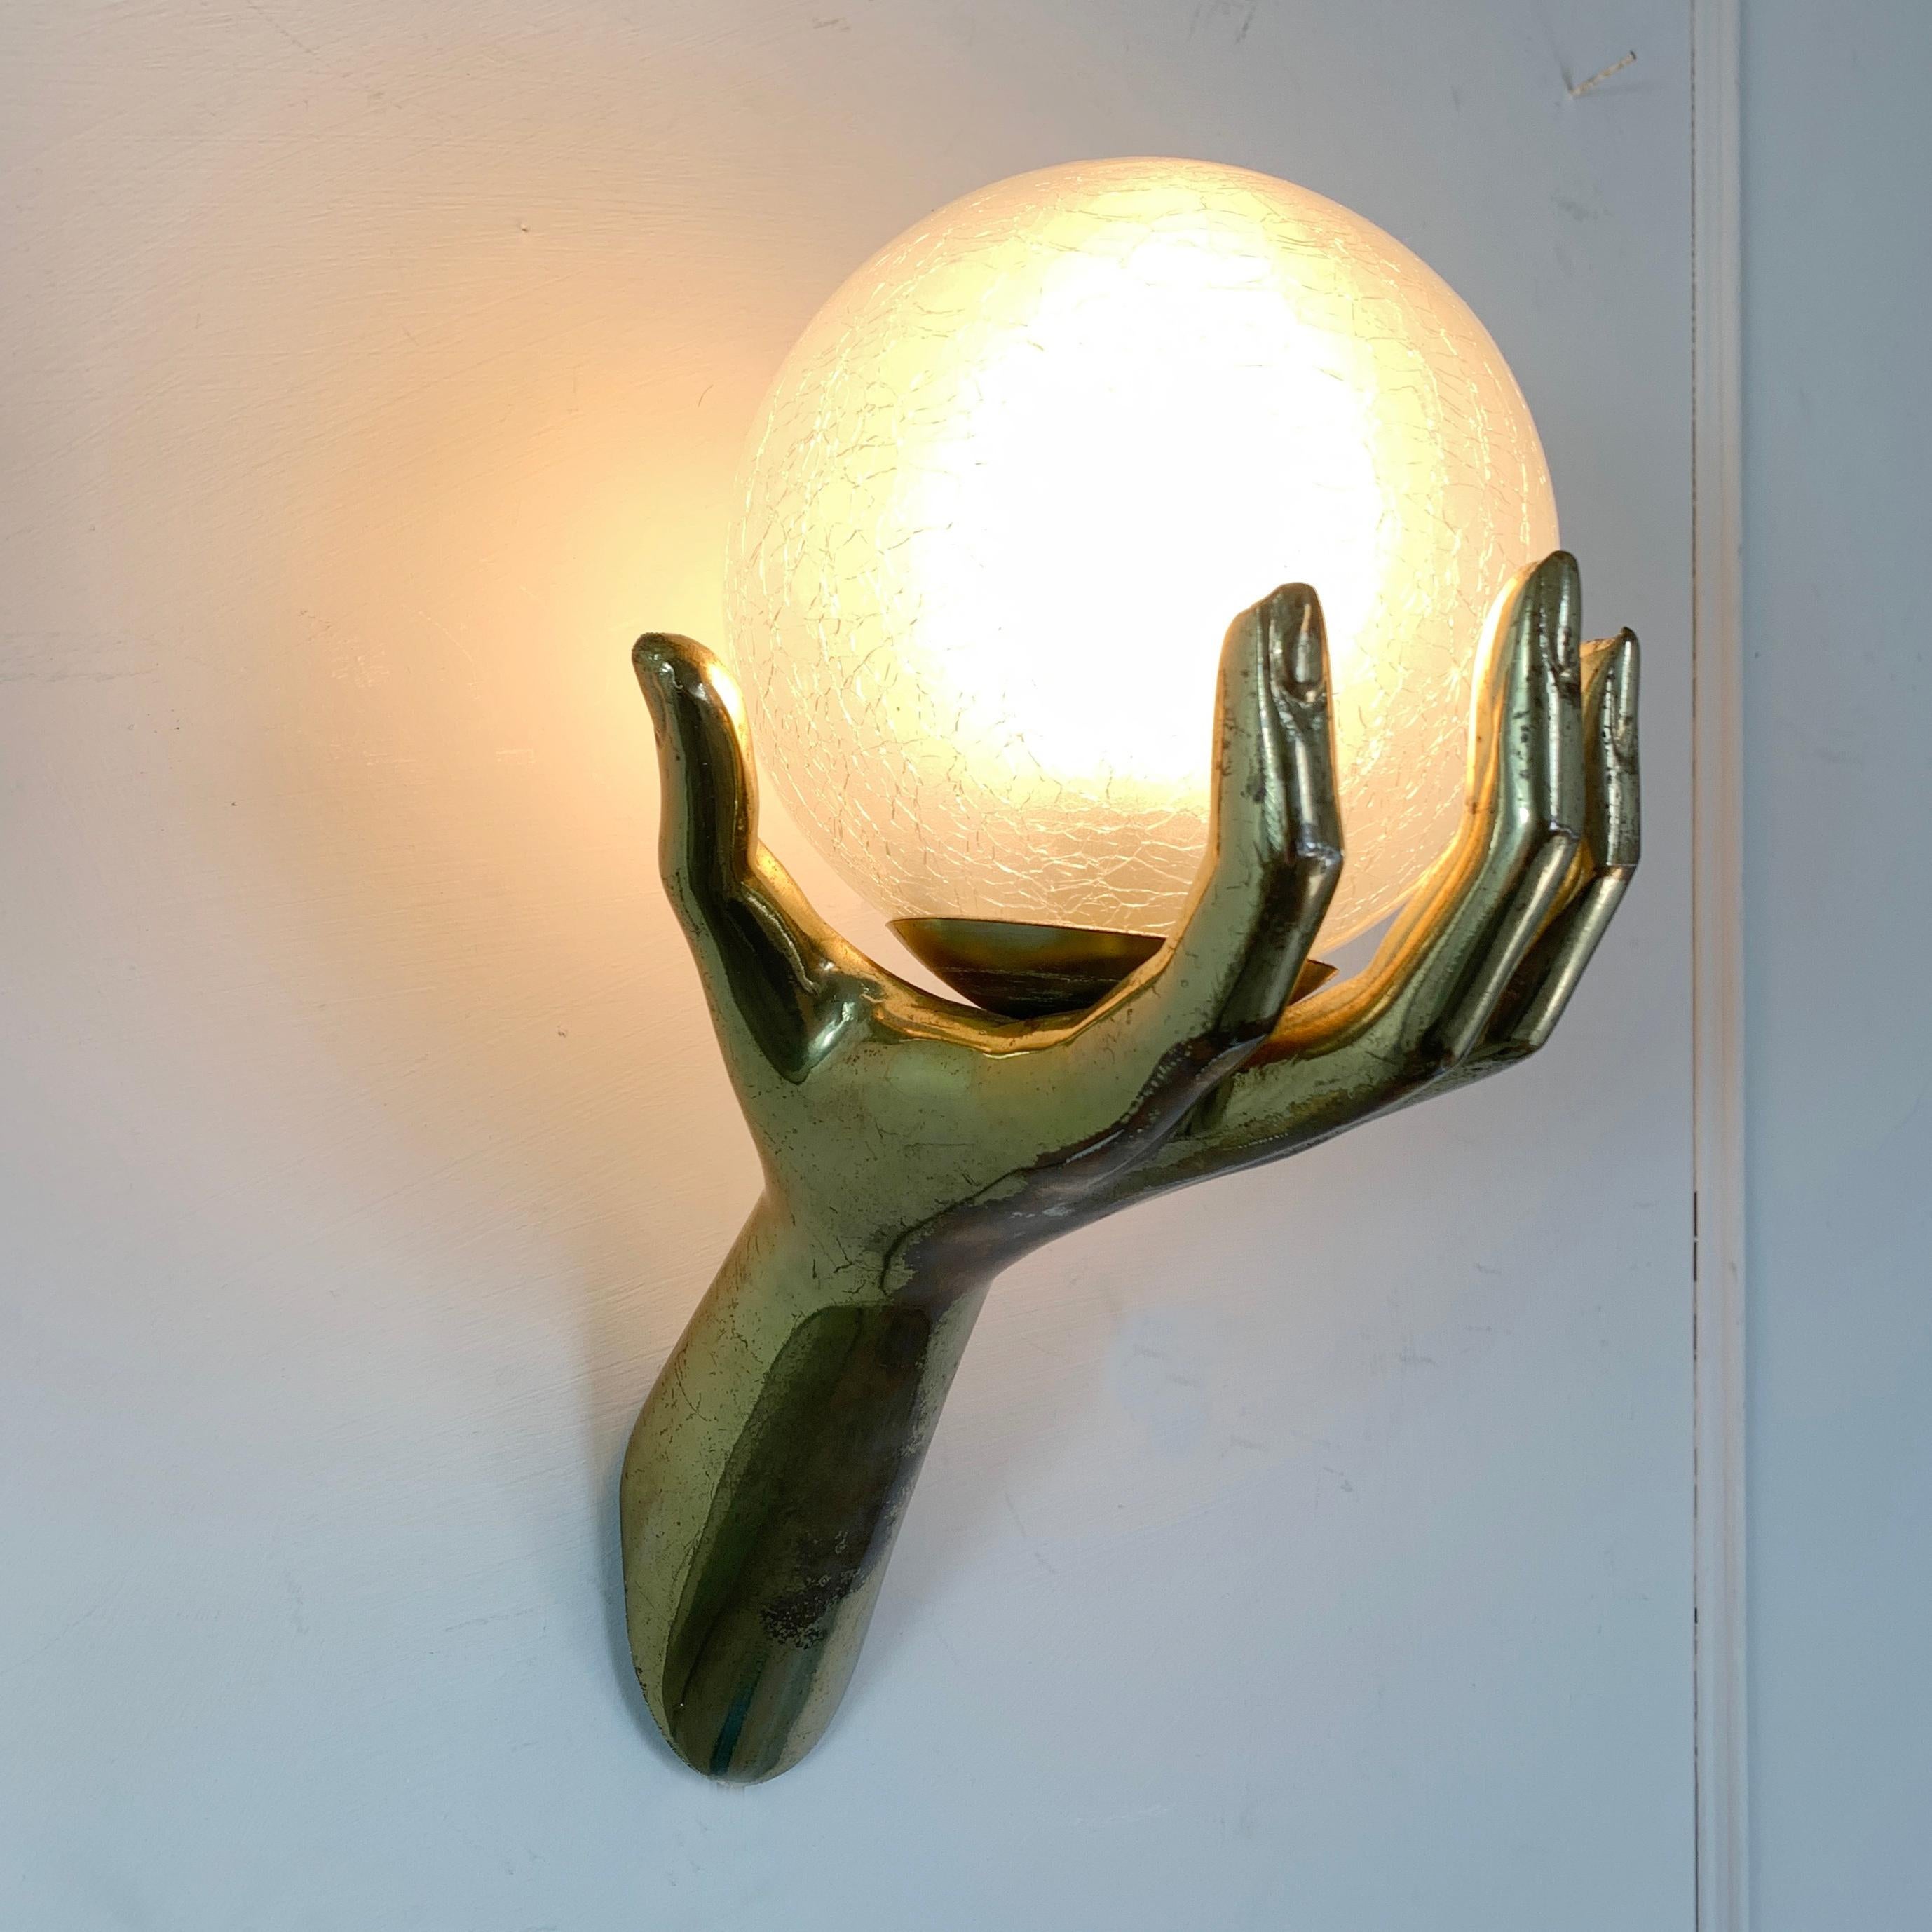 Maison Arlus bronze hand wall sconce
In superb original condition, with light signs of patina, and bearing the rare and original hand blown glass, open globe shade (these have usually been lost or damaged and replaced with modern opaque glass